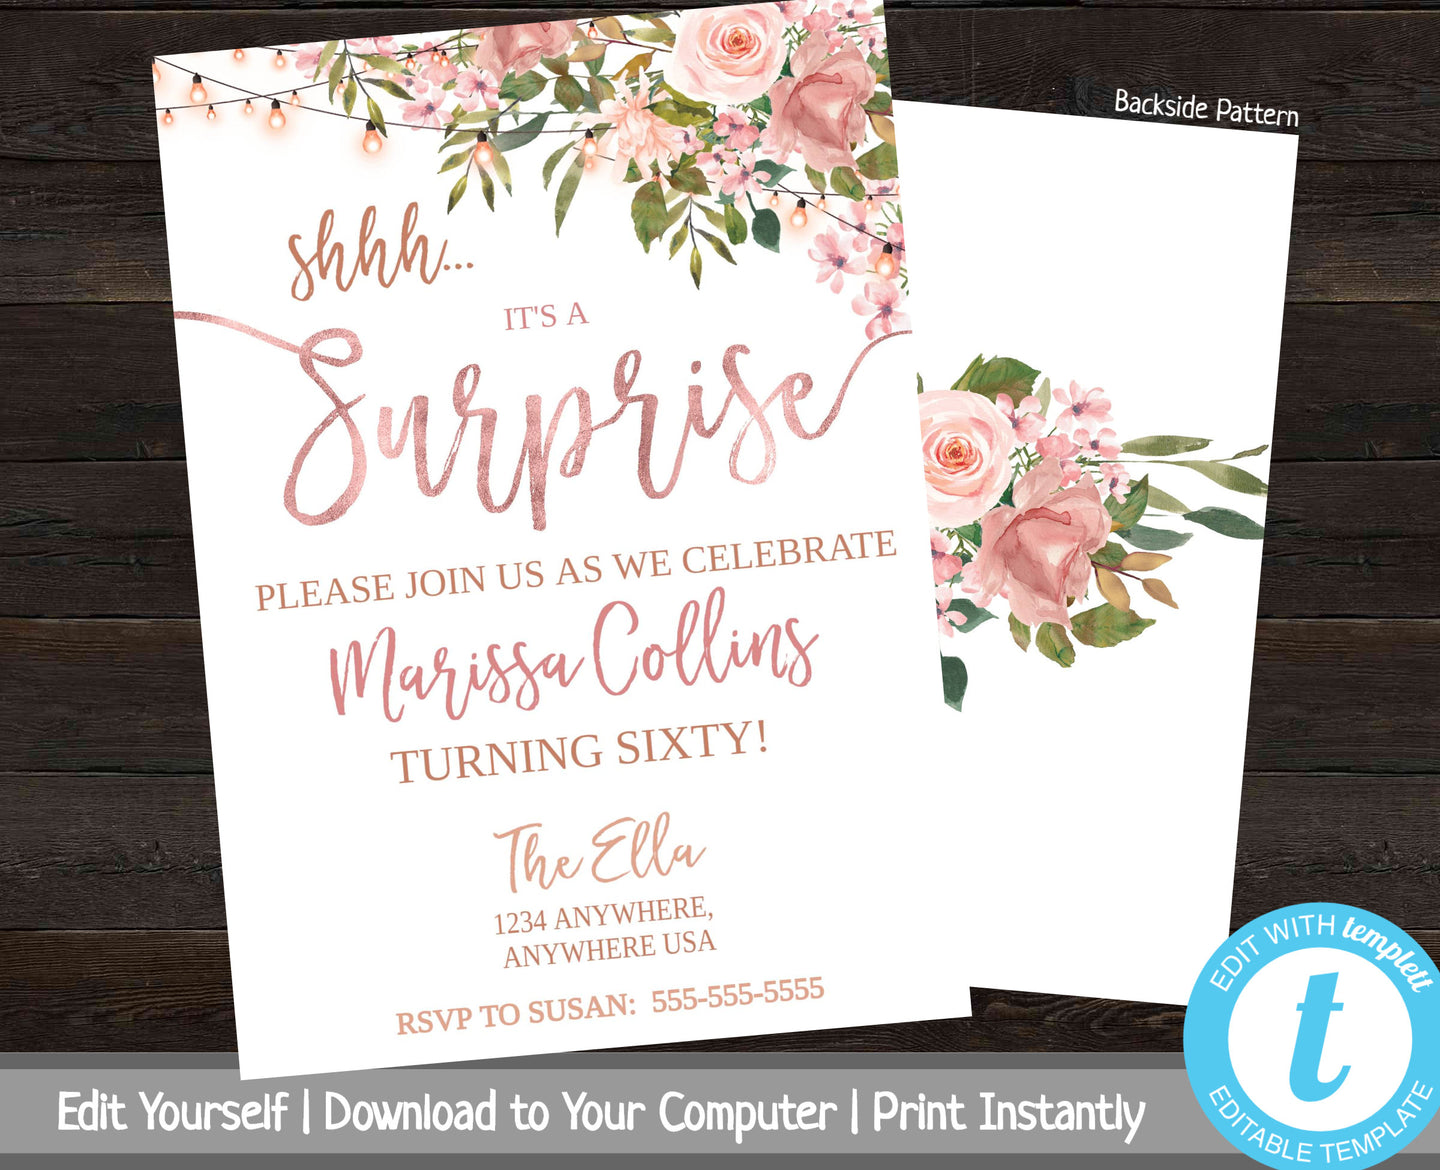 Shhh It's A Surprise, Floral Birthday Party Invitation, Rustic Surprise Party Invite, Surprise Birthday Party Invitation, Milestone Birthday